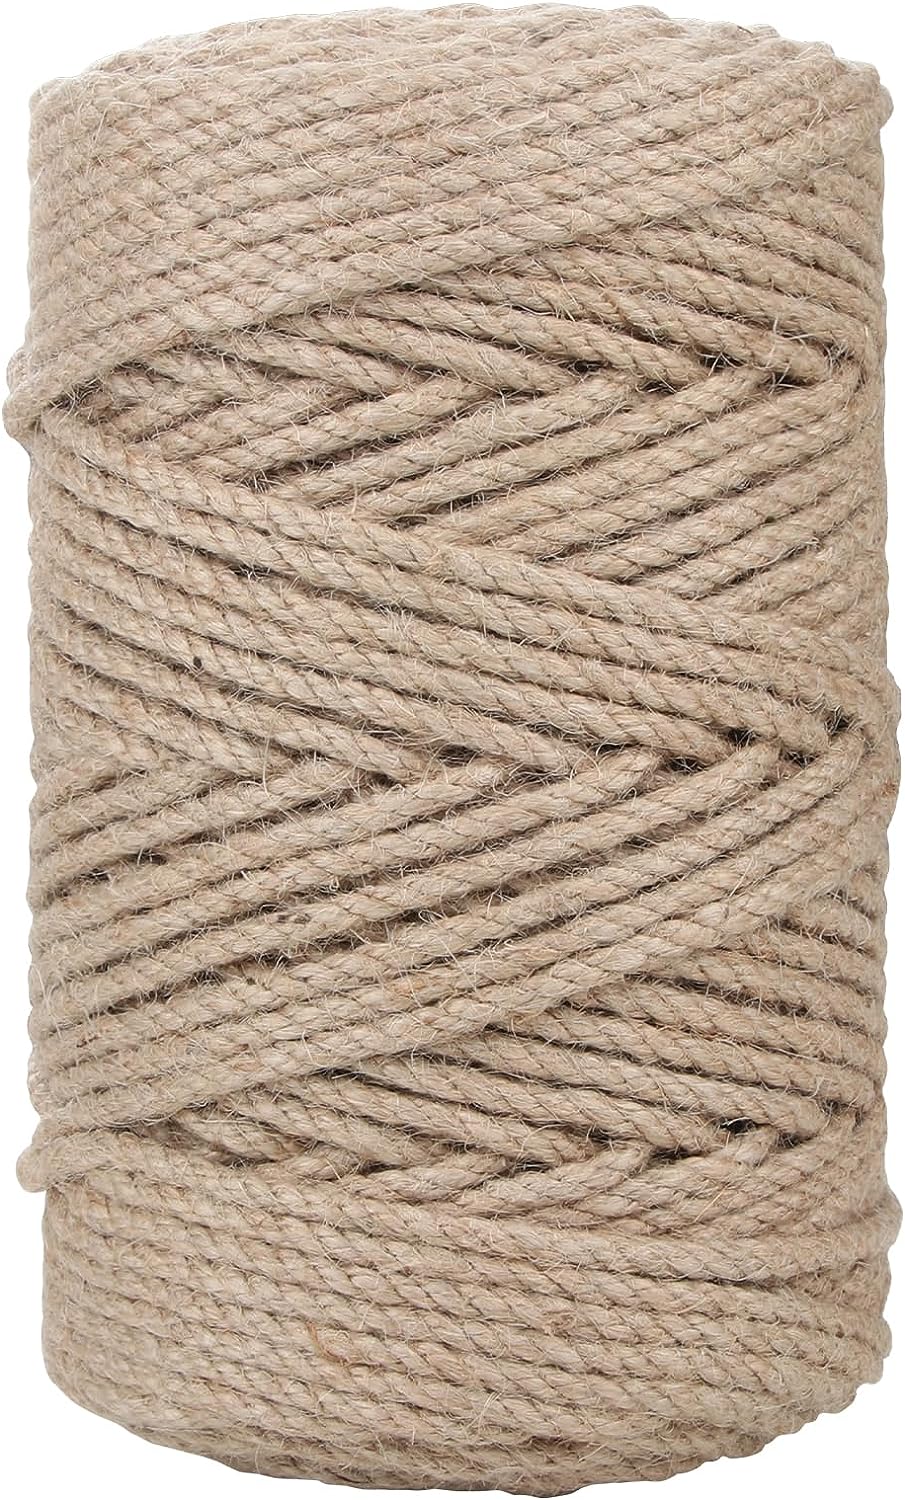 HULISEN Colorful Jute Twine, 15 Rolls 2mm 3 Strands Natural Jute String for  Artworks, DIY Crafts, Picture Display and Embellishments, Festive Twine